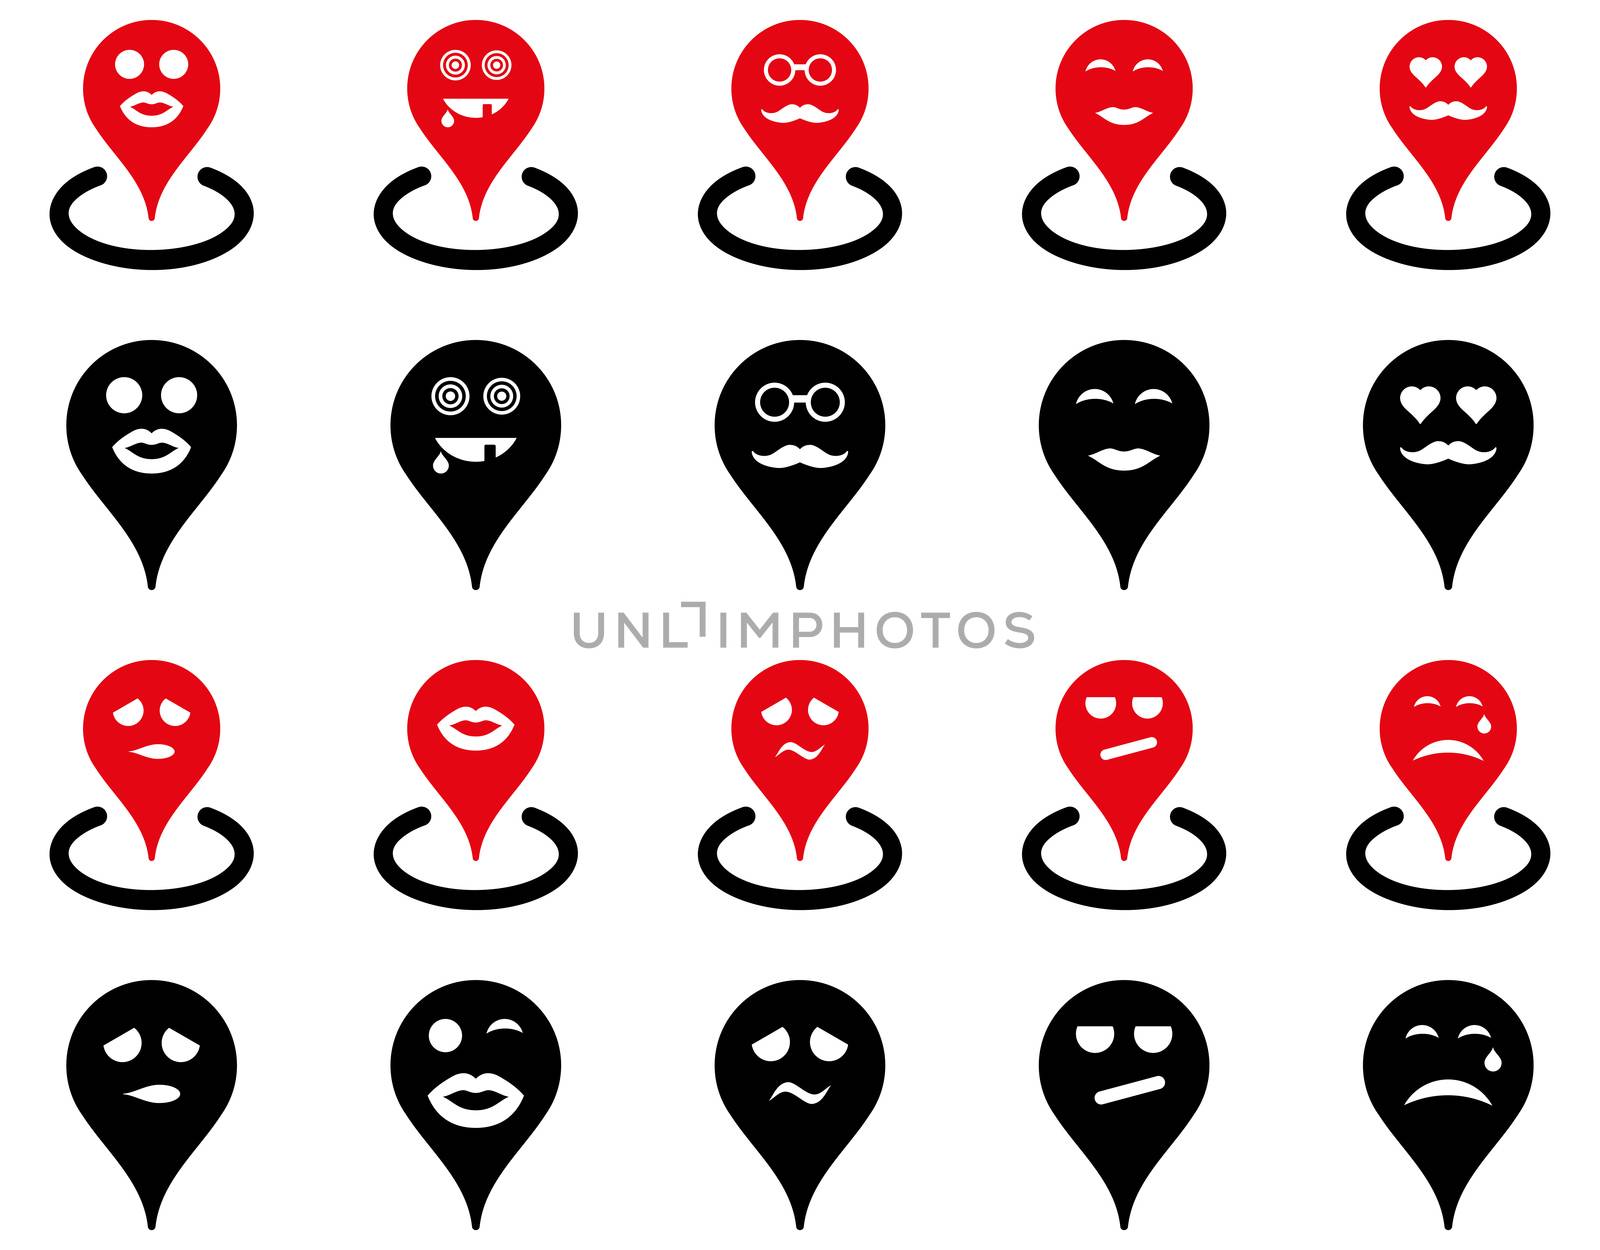 Smiled map marker icons. Glyph set style is bicolor flat images, intensive red and black symbols, isolated on a white background.